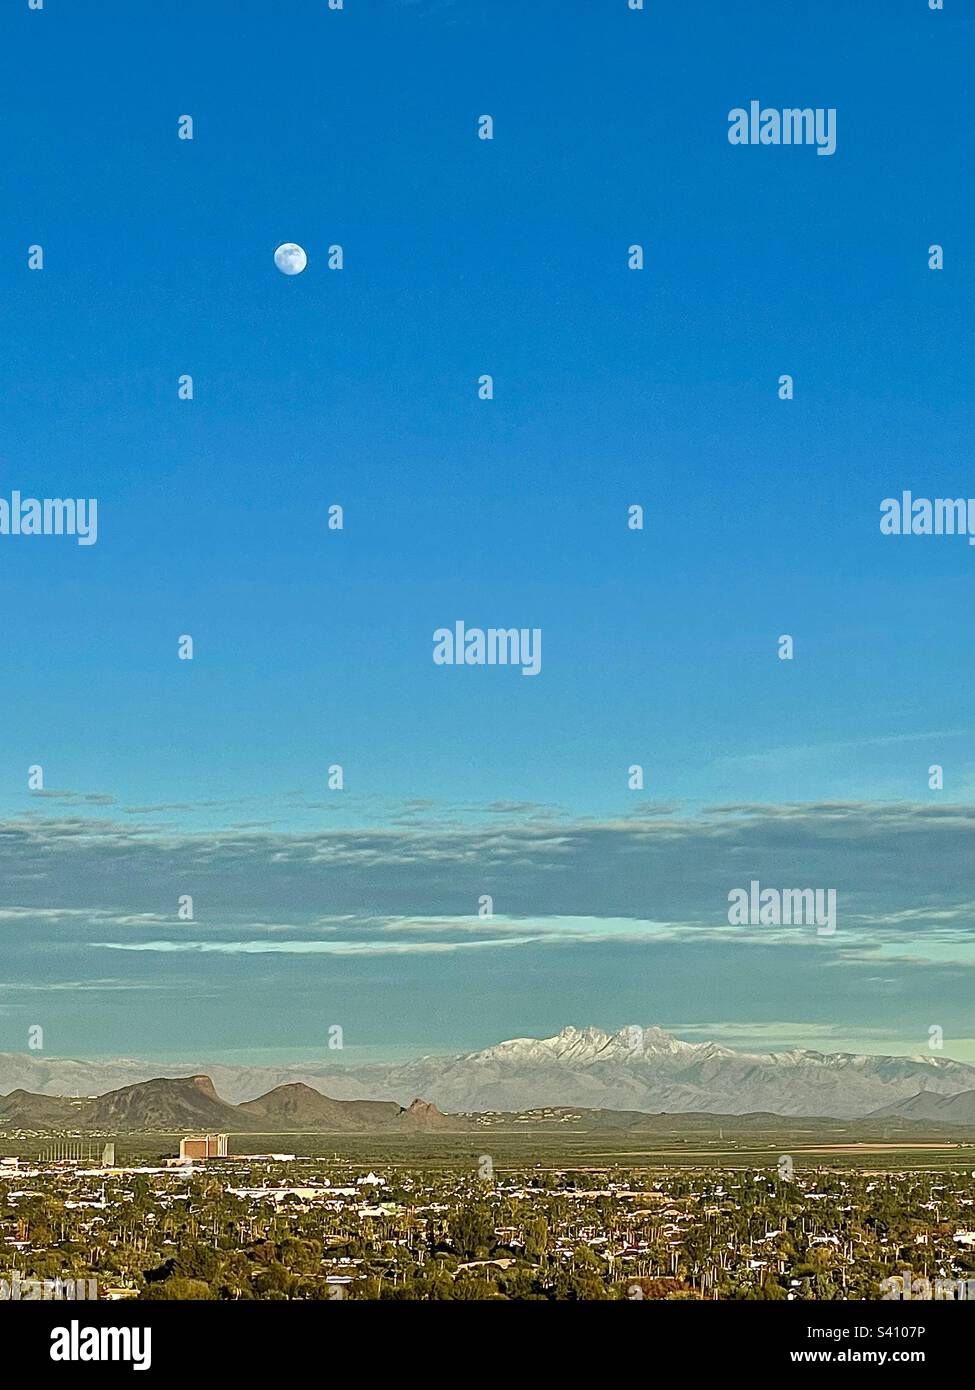 Moon over snowy Four Peaks, Eagle Mountain, Indian Reservation, Casino, Scottsdale, Phoenix Arizona, deep blue sky, green fields, suburbs, from Cholla trail, Camelback Mountain, copy space Stock Photo